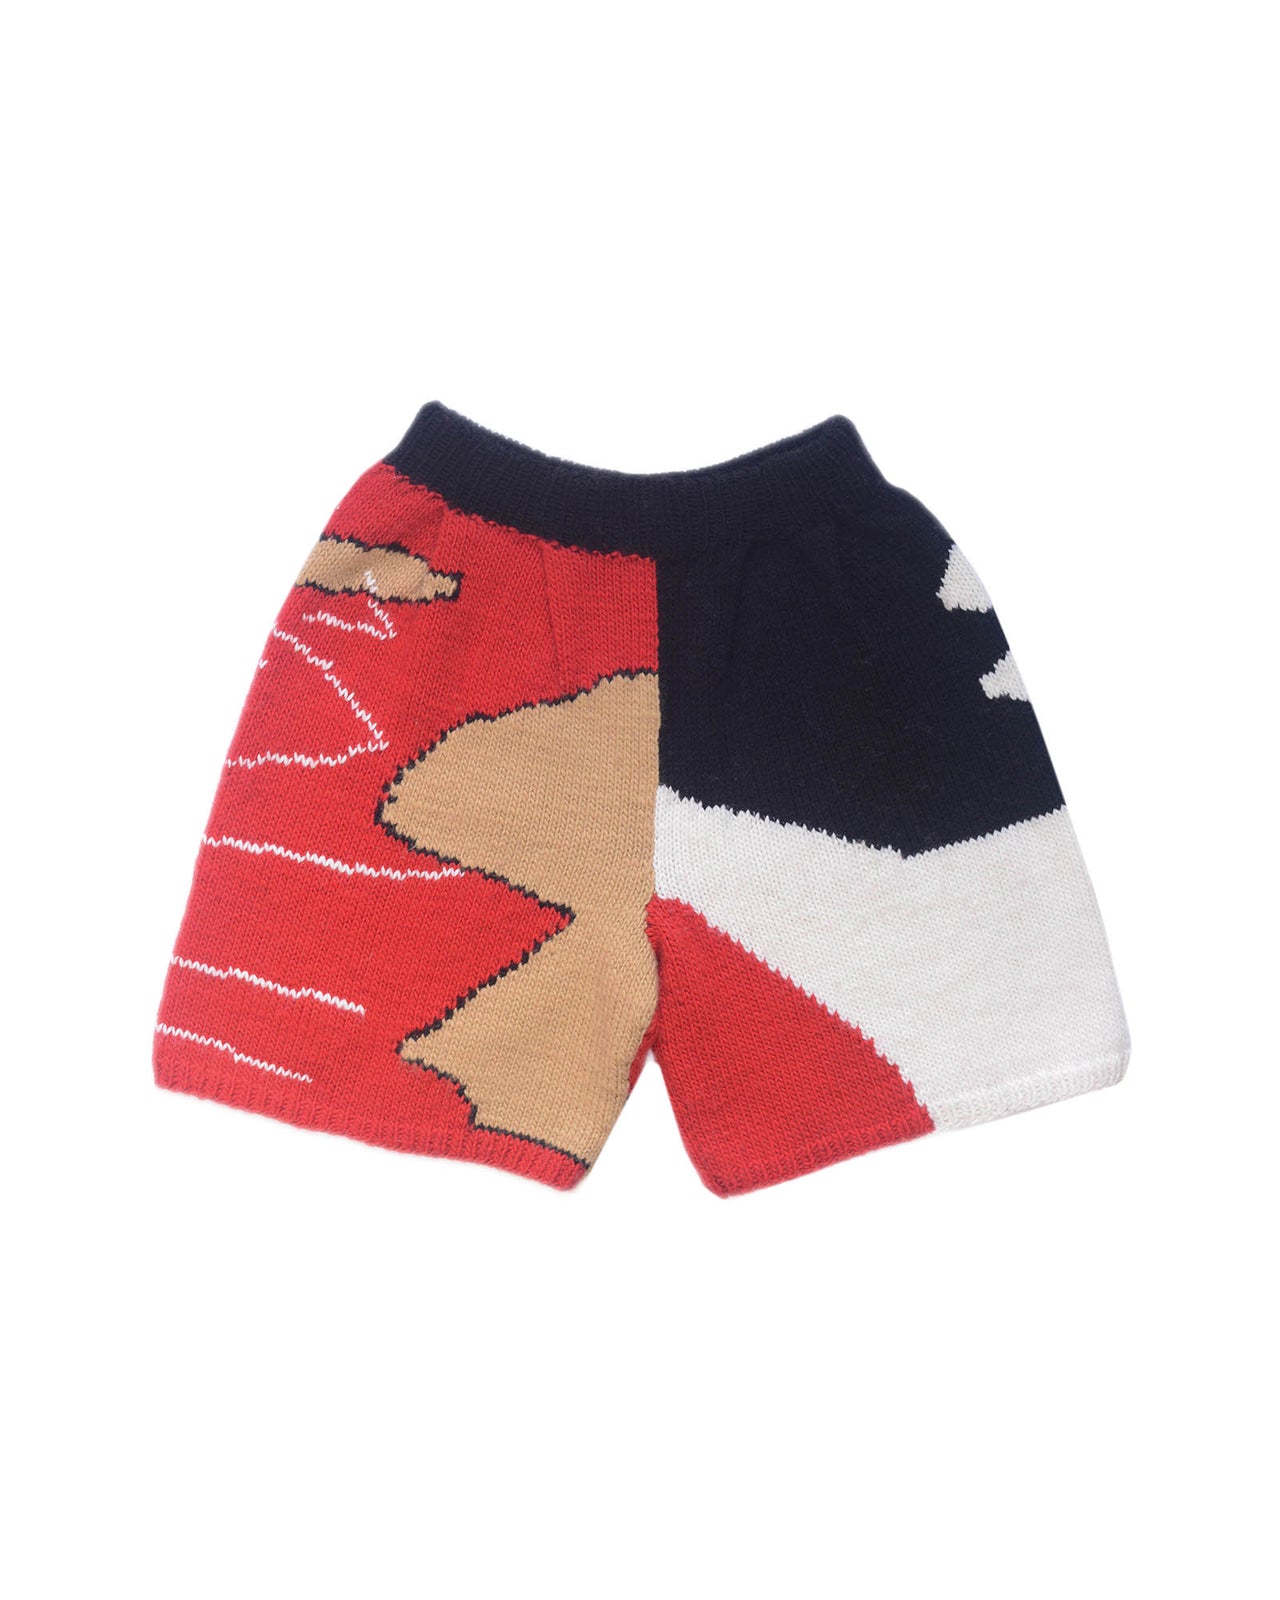 wool bermuda shorts on white background. Red, black, white and beige colour block patterns decorate the bermuda shorts 